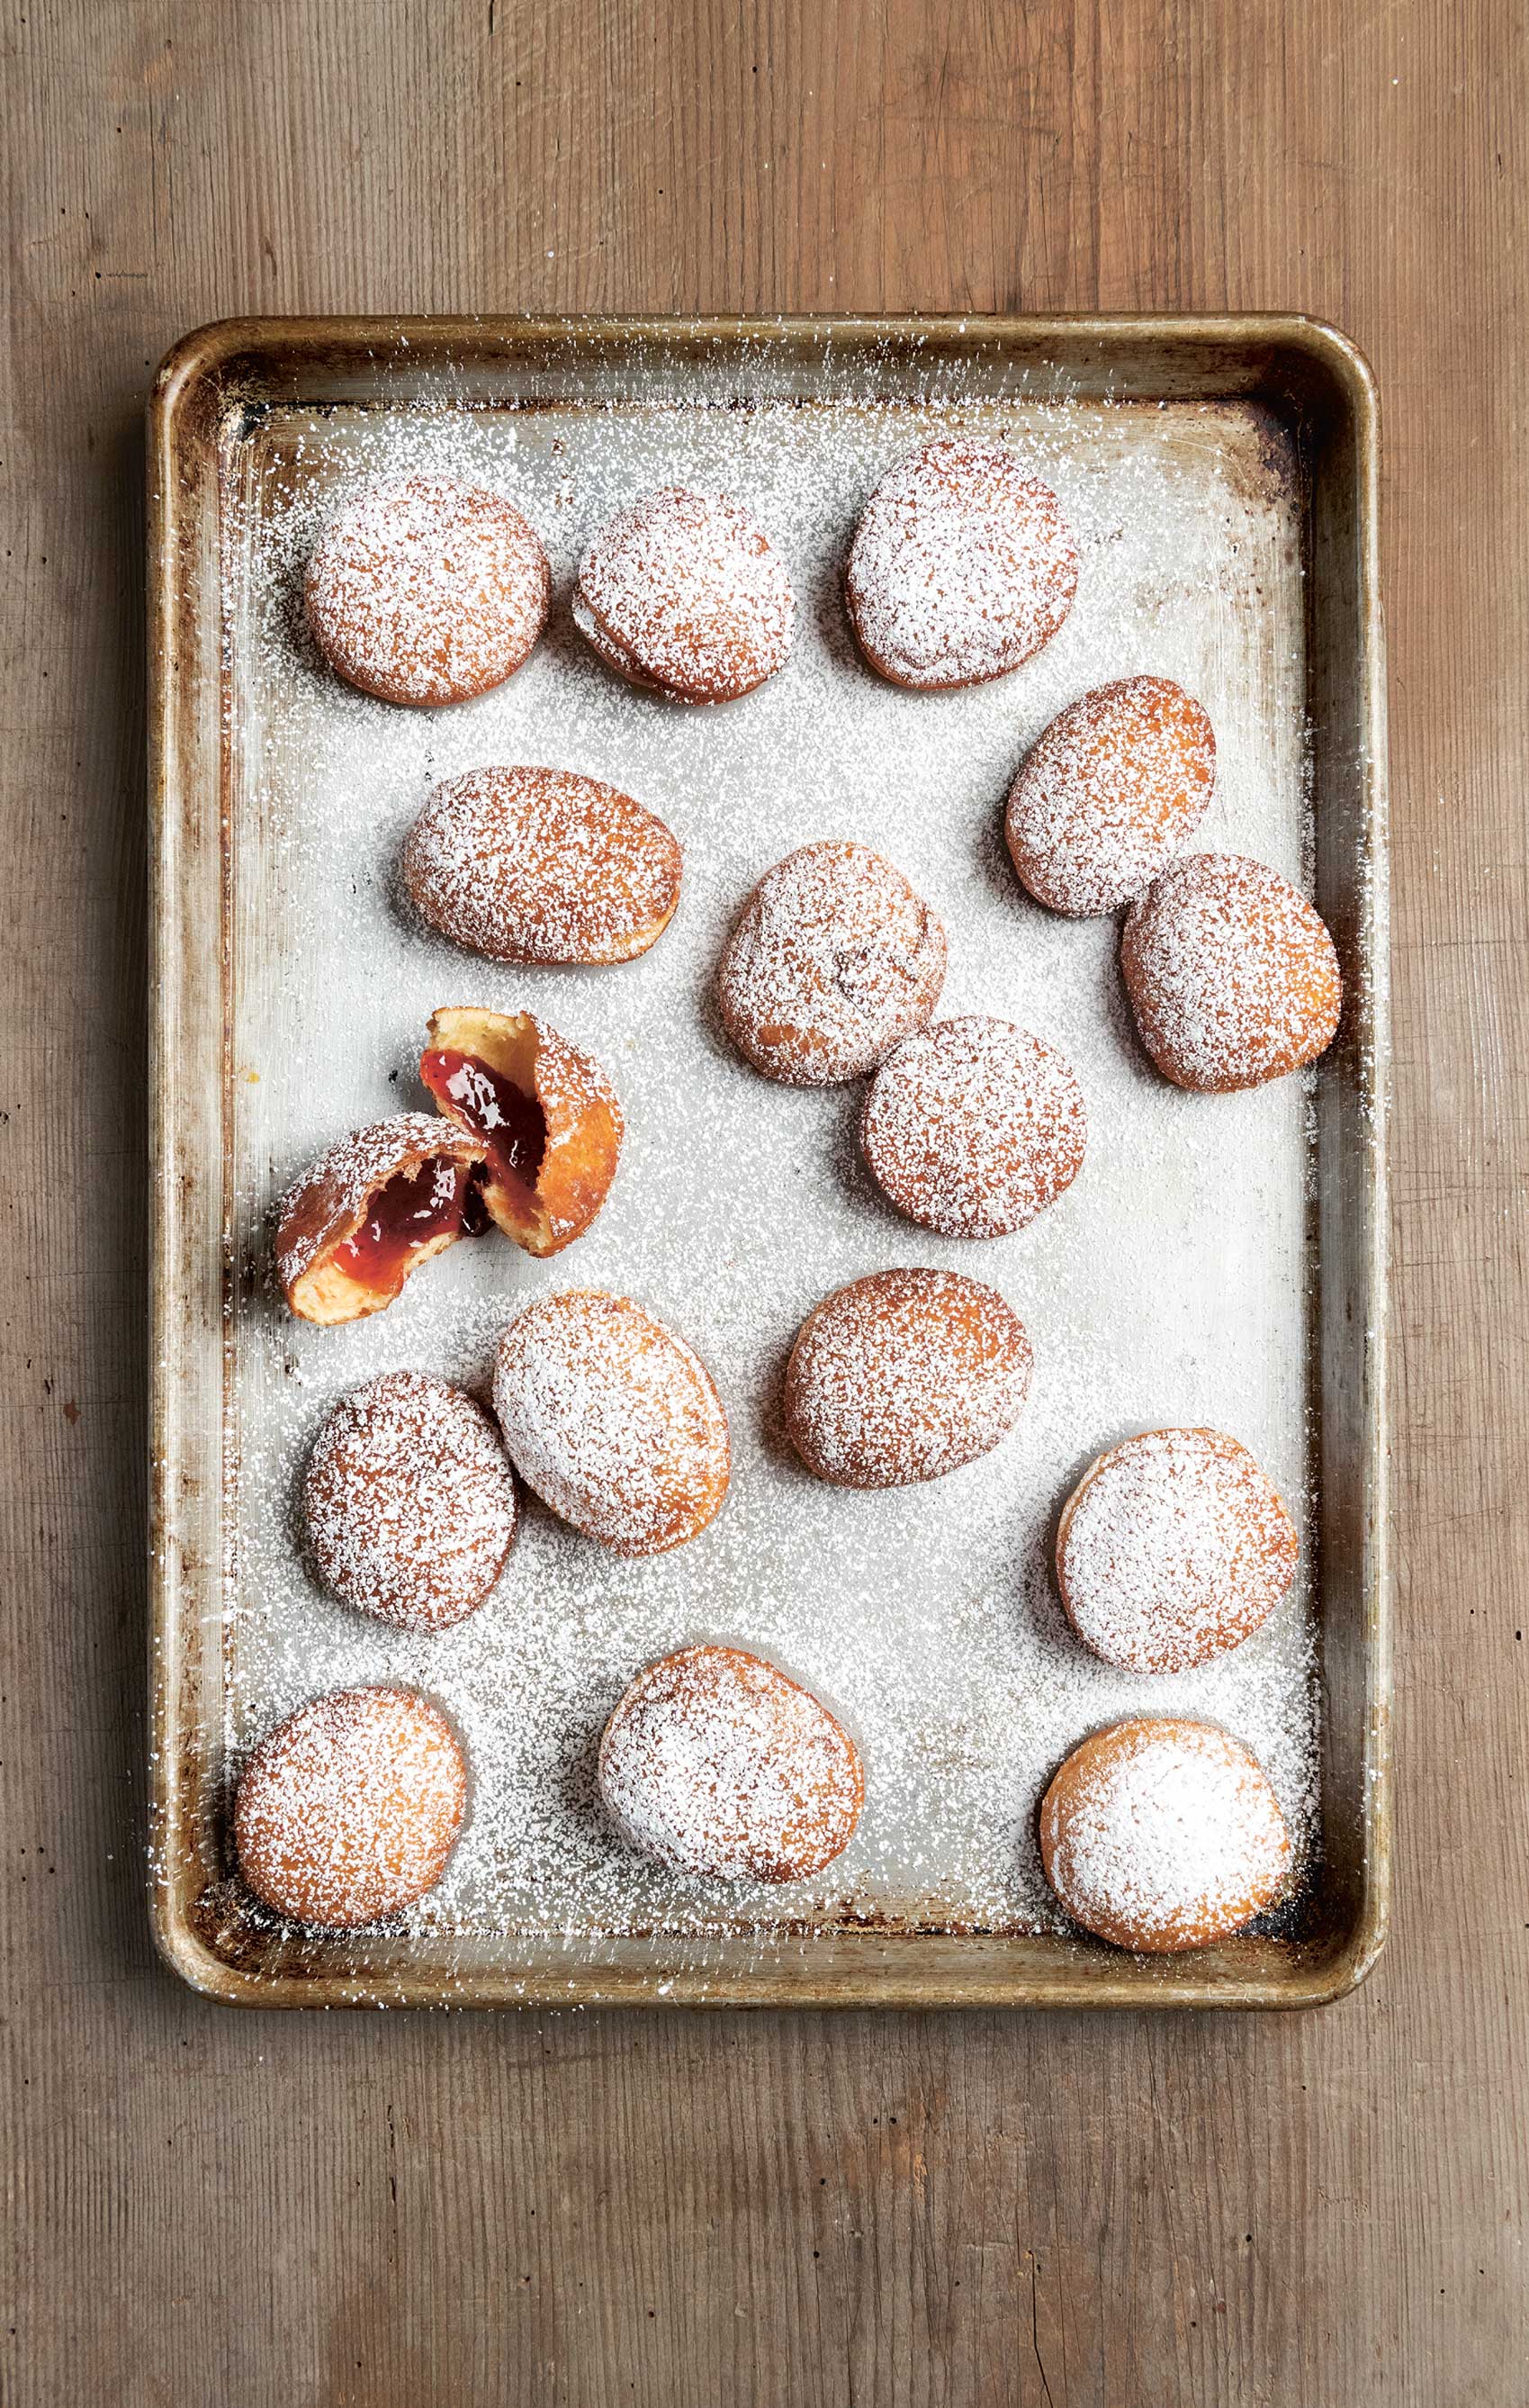 Sufganiyot, a traditional Israeli Hanukkah treat that actually comes from Poland, according to our new book